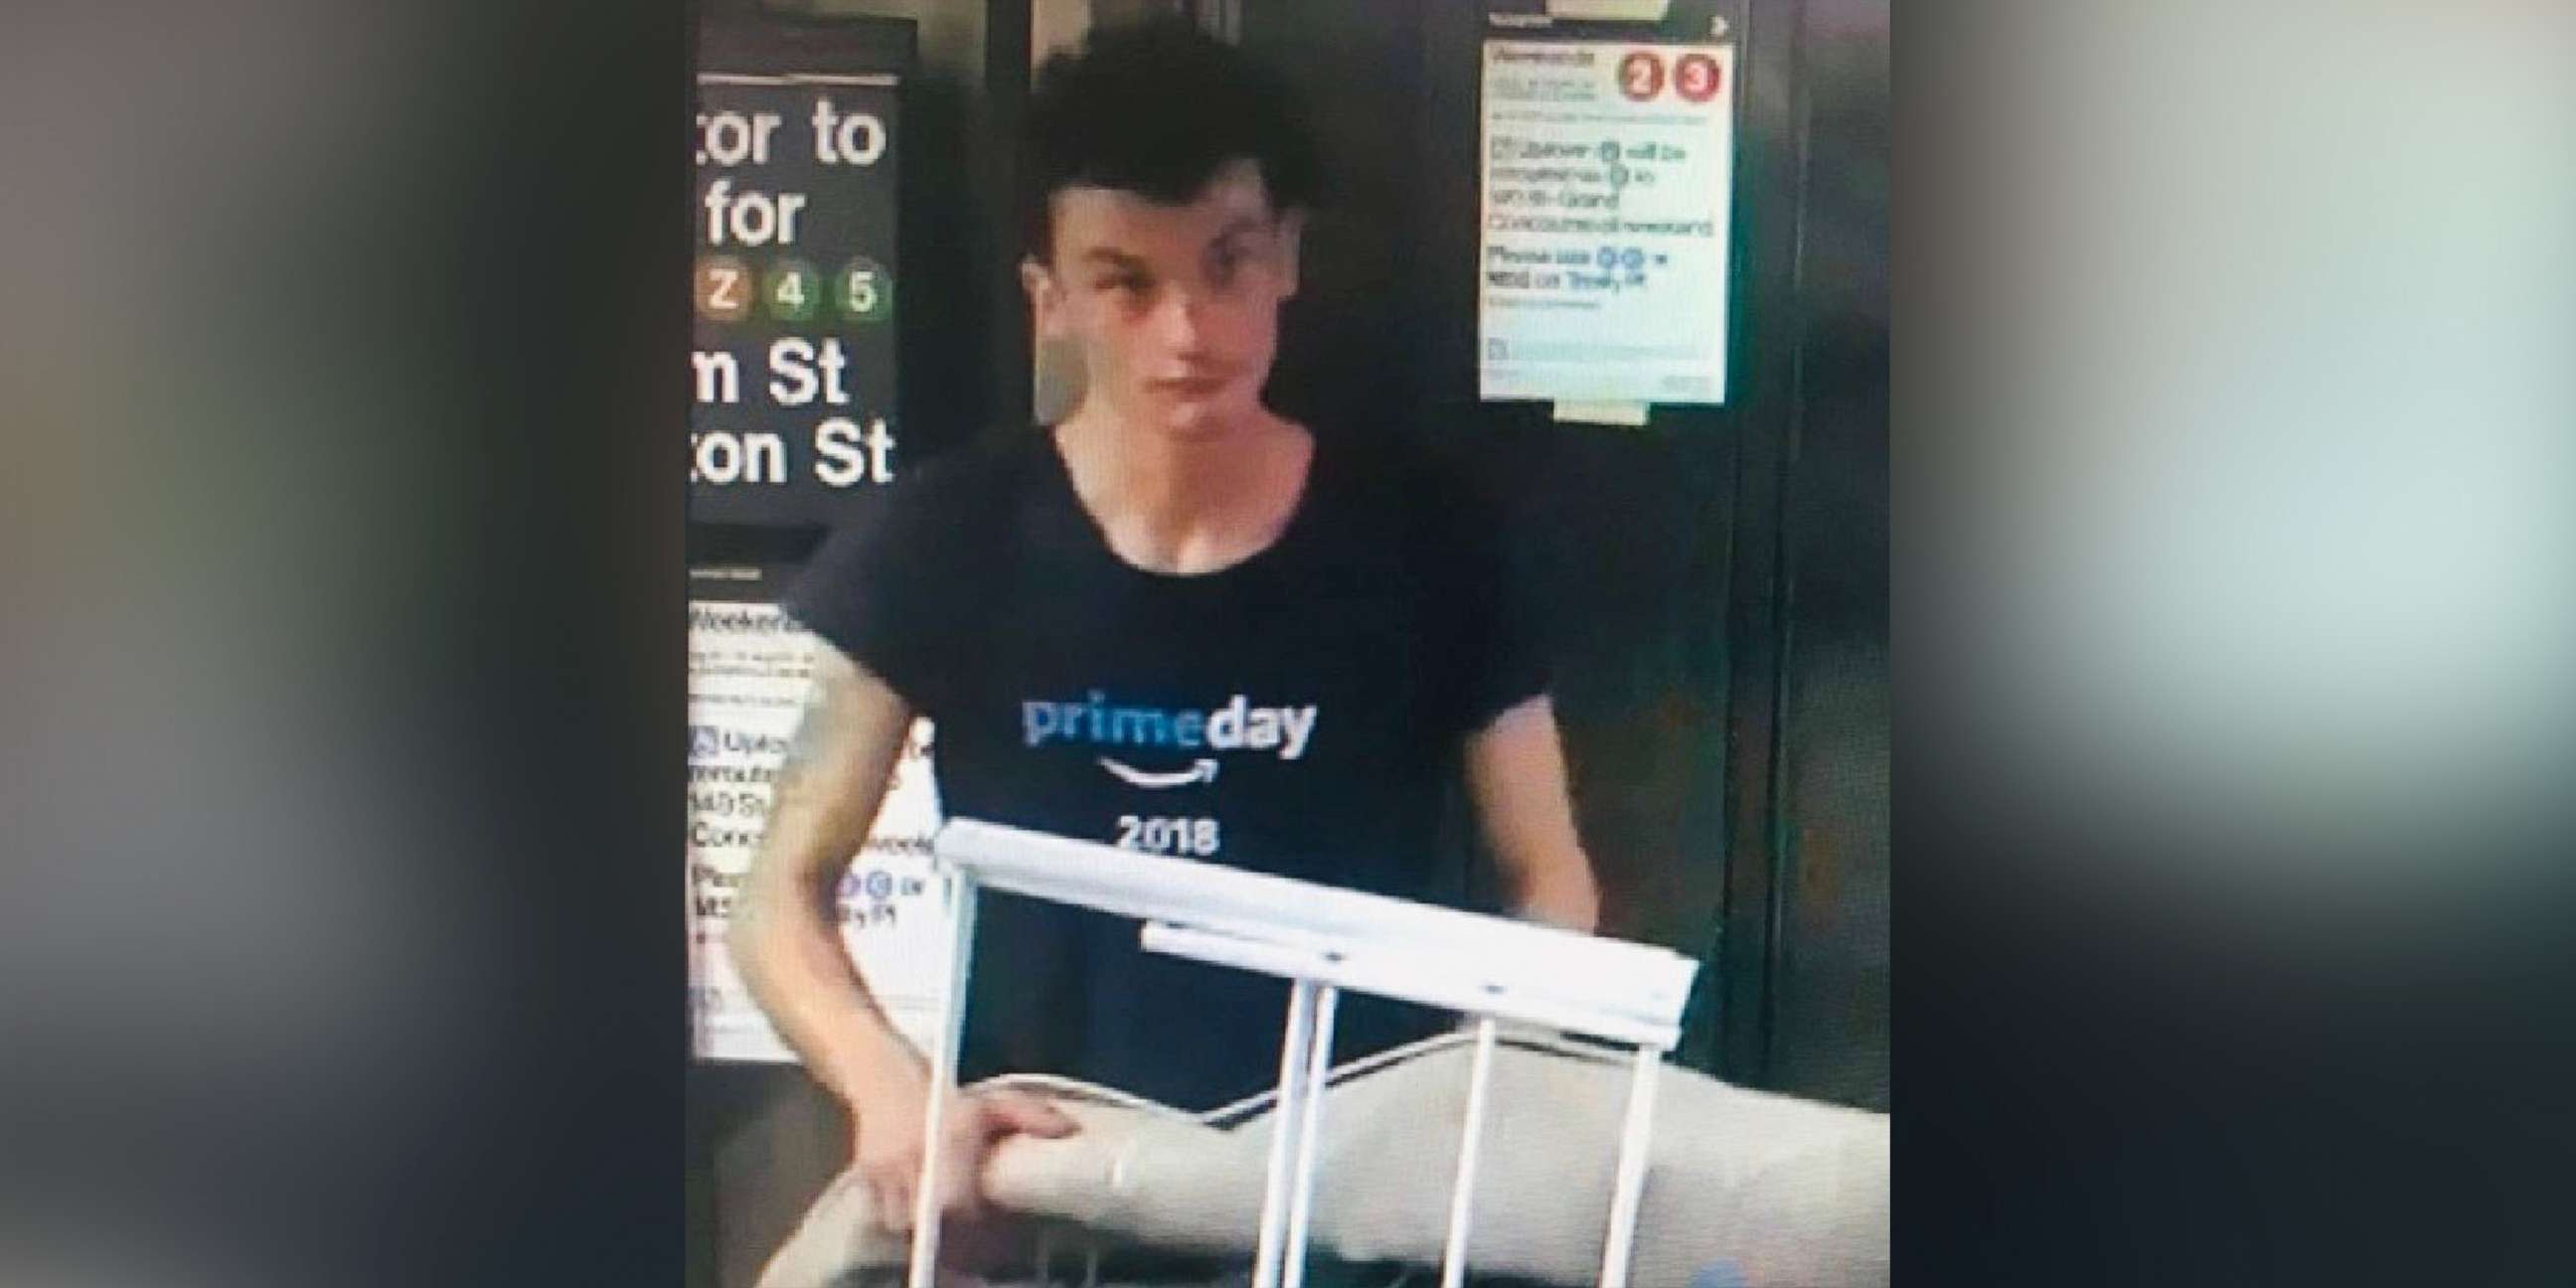 PHOTO: Police are looking to locate and identify this individual wanted for questioning in regard to the suspicious items inside the Fulton Street subway station in Manhattan, Aug. 16, 2019.